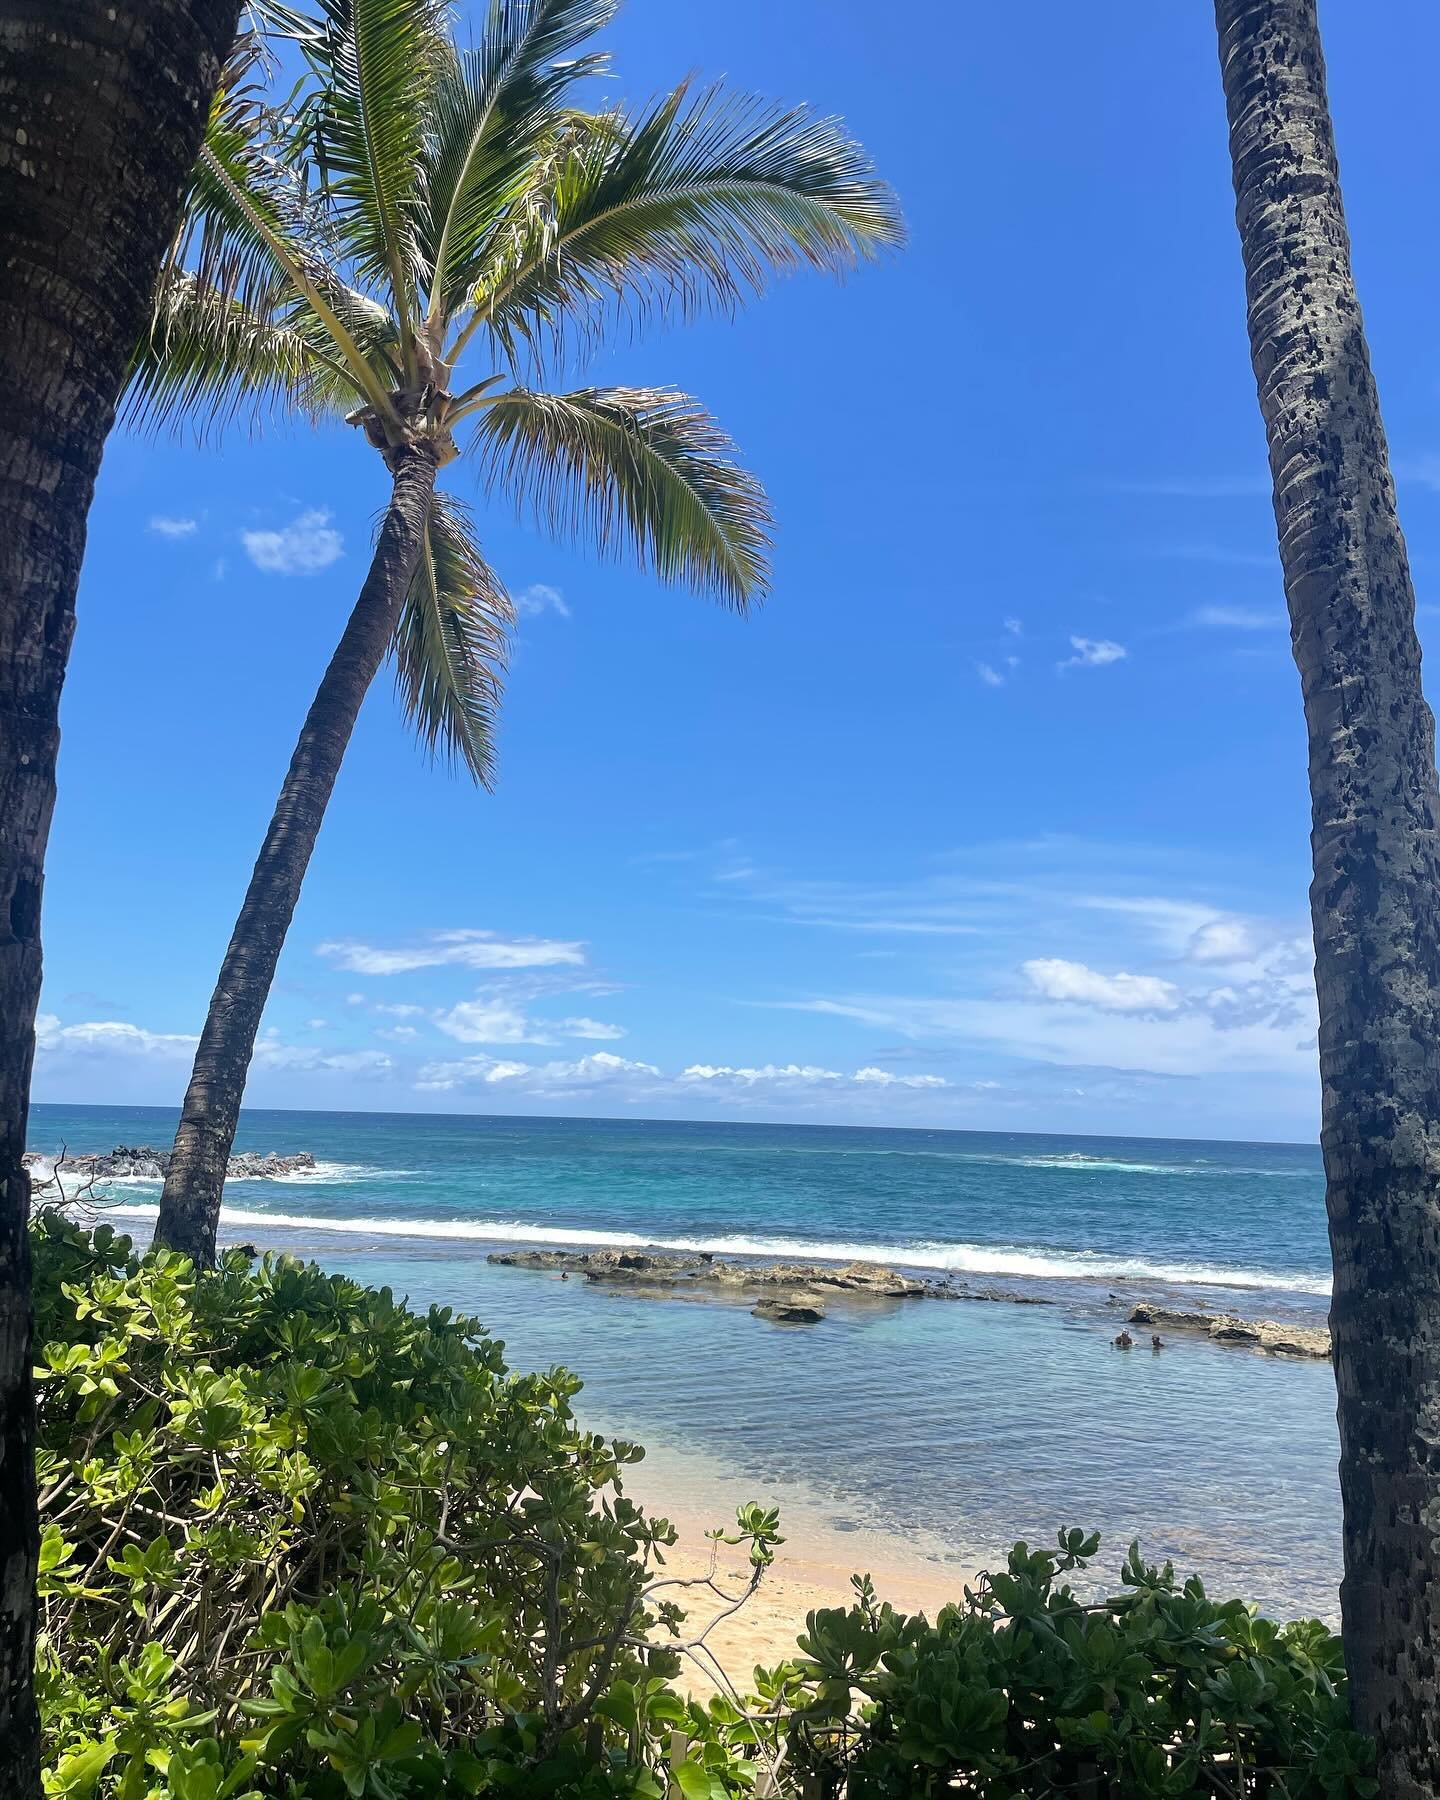 In moments of stress or difficulty, finding solace in a happy place can be incredibly powerful. For me, that place is a warm, tropical beach. 🌴✨ 

Visualizing this serene environment helps me tap into the sensory experiences that bring me joy and pe